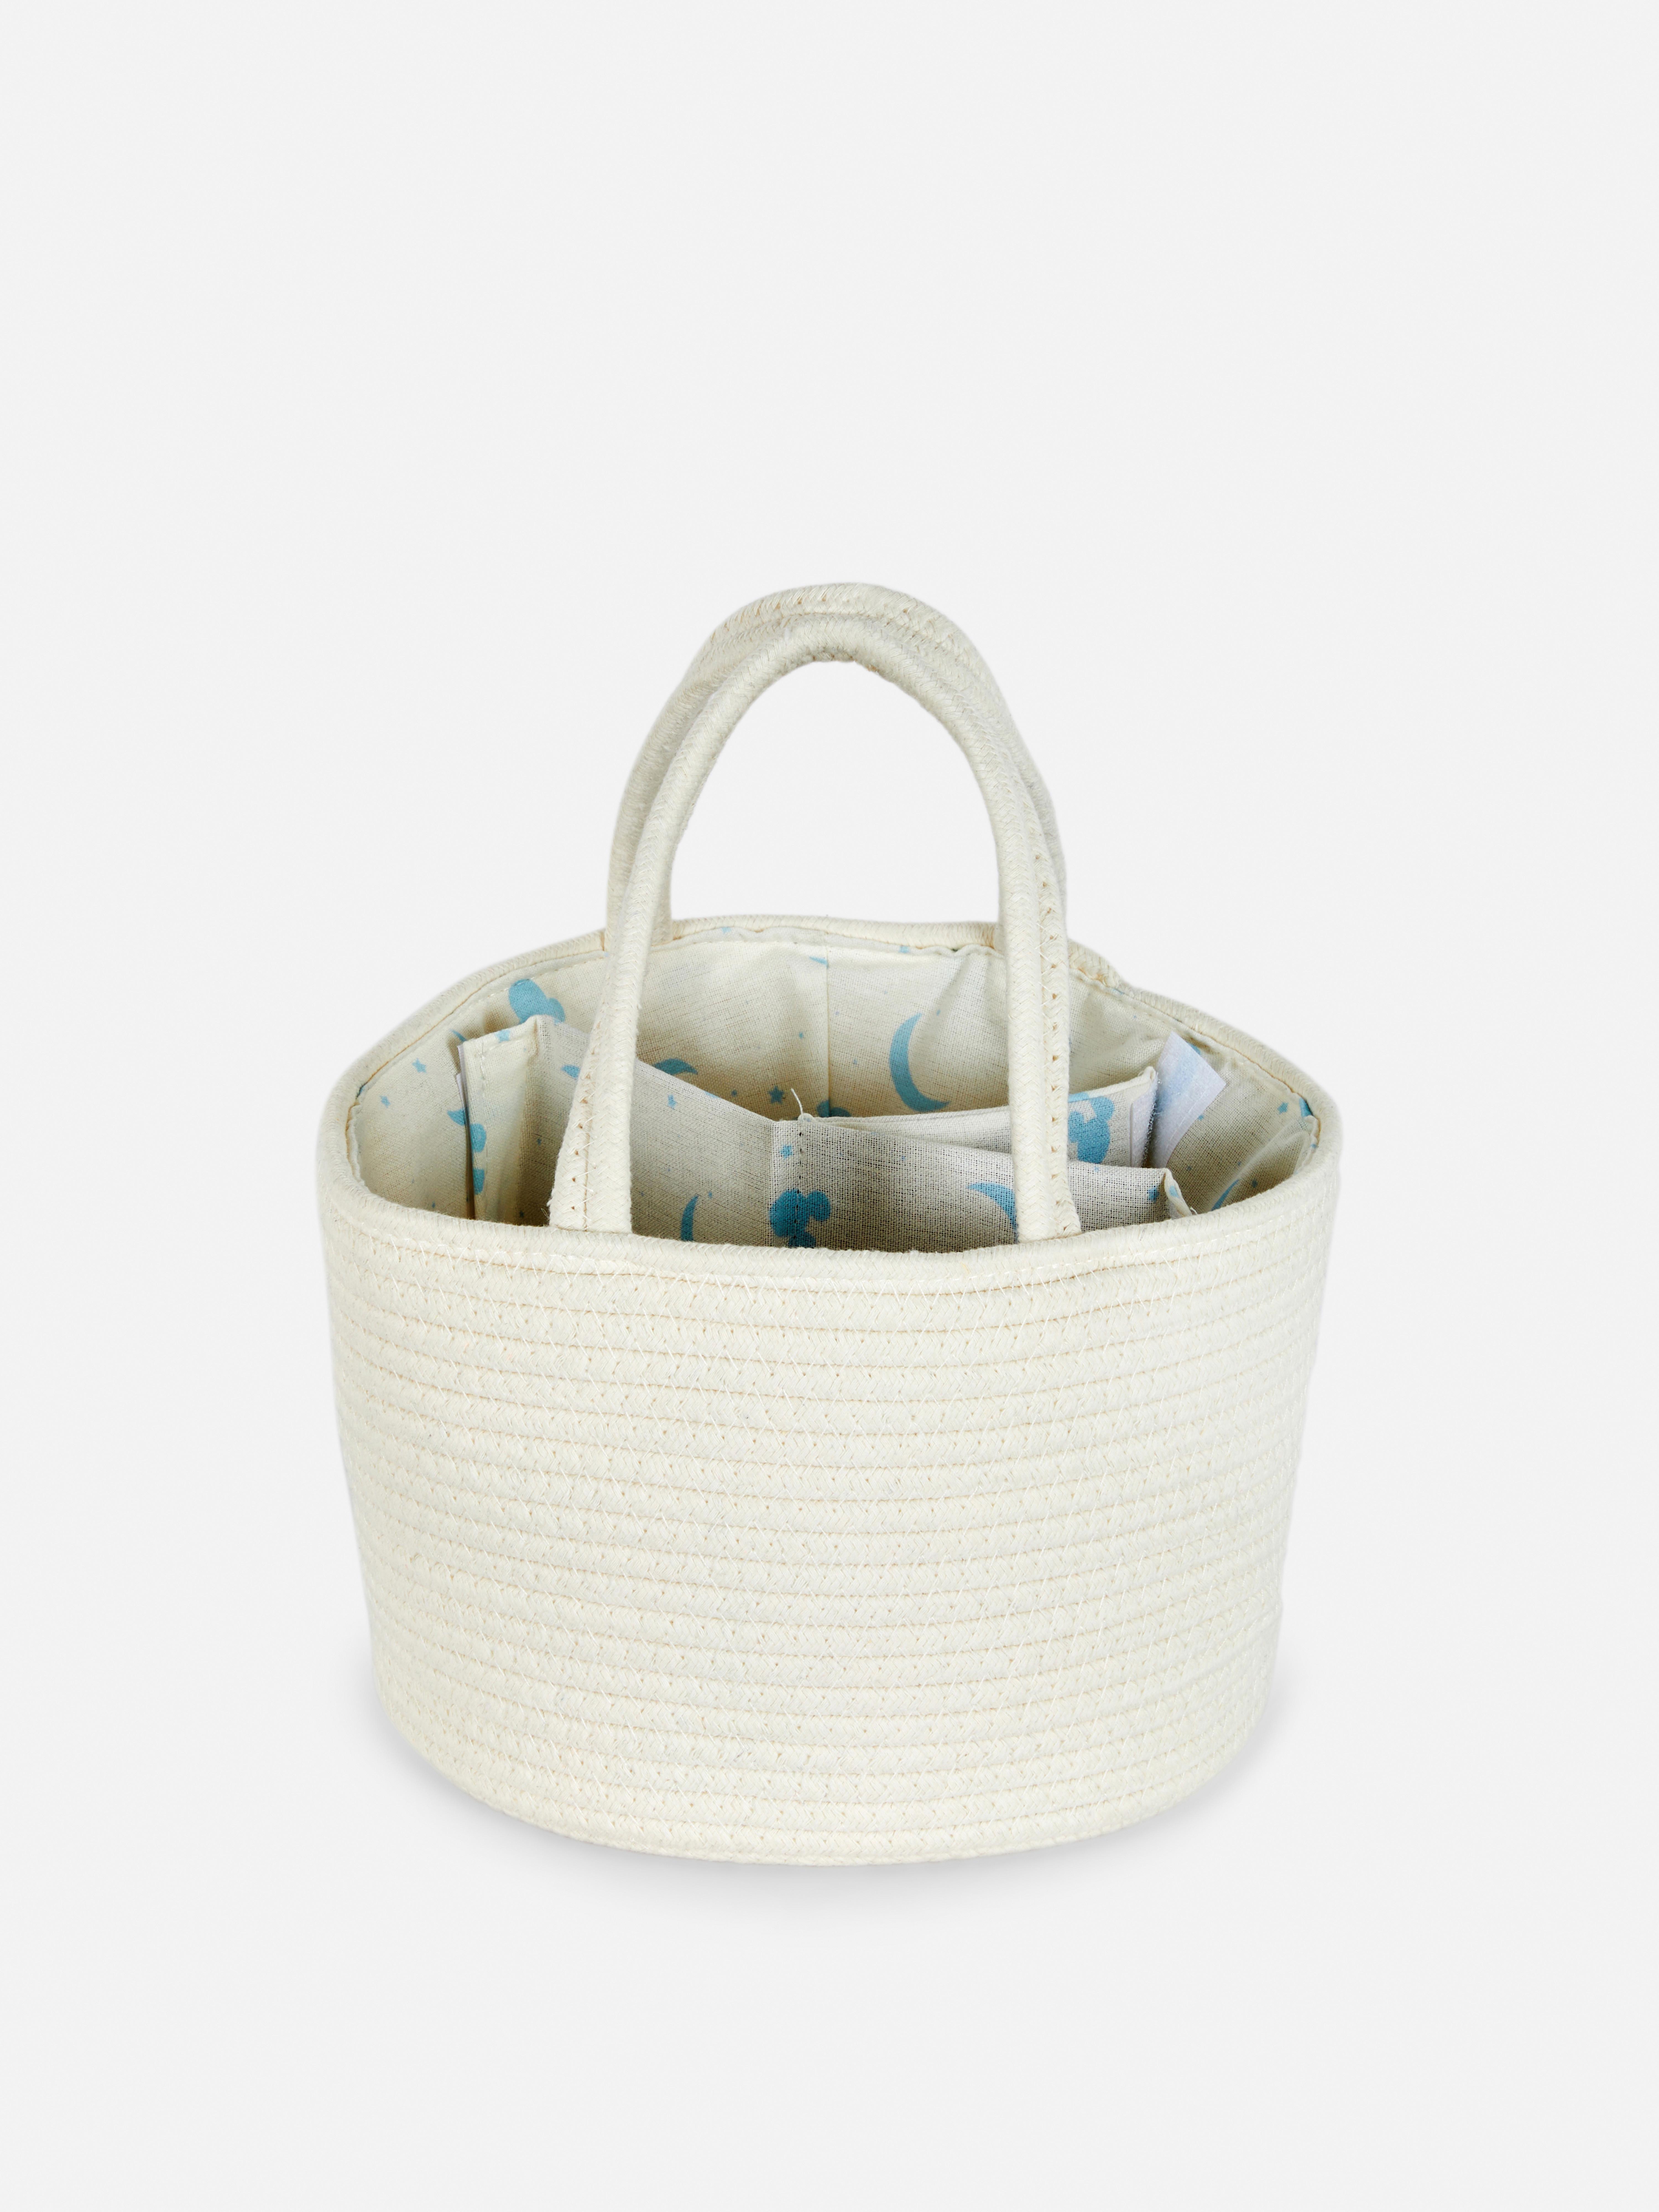 Disney’s Mickey Mouse Woven Rope Basket